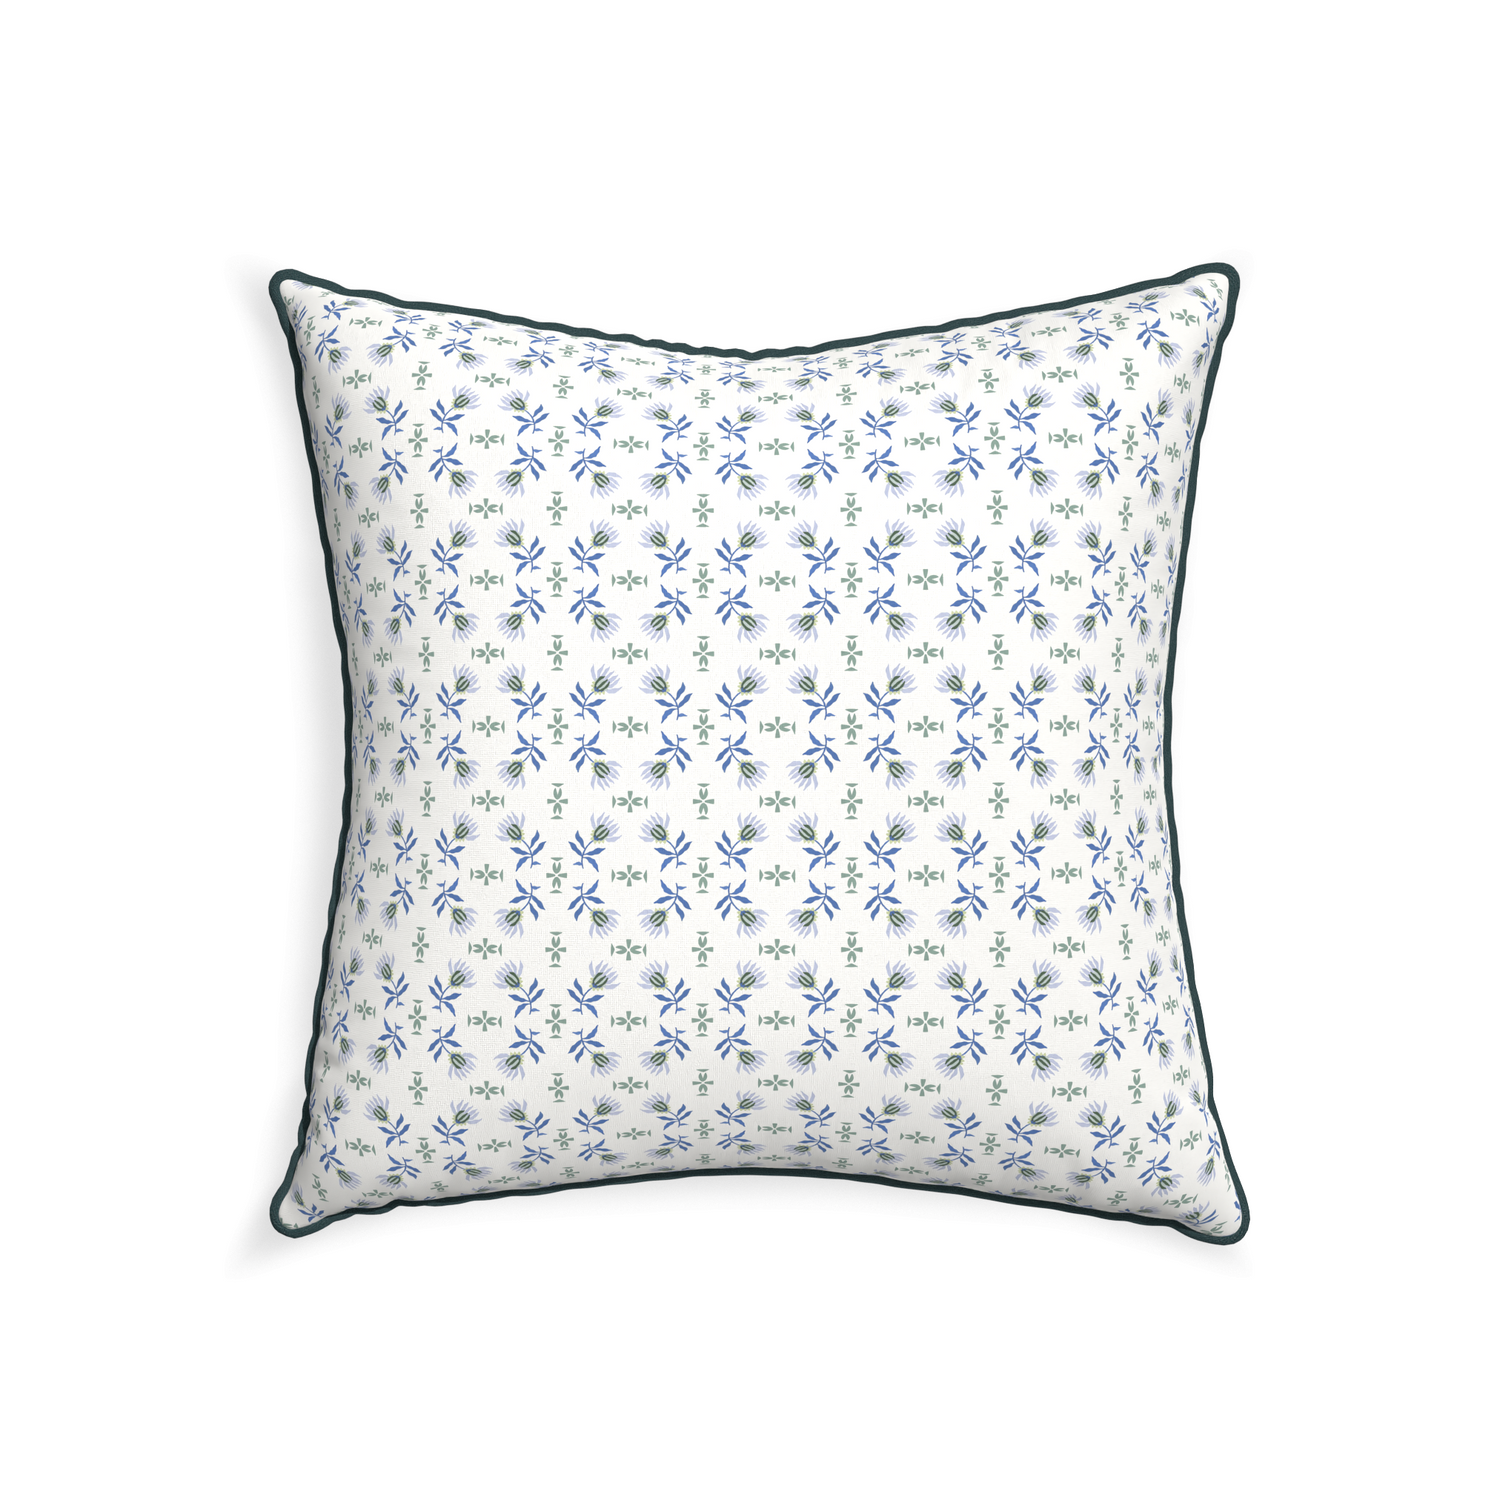 22-square lee custom blue & green floralpillow with p piping on white background